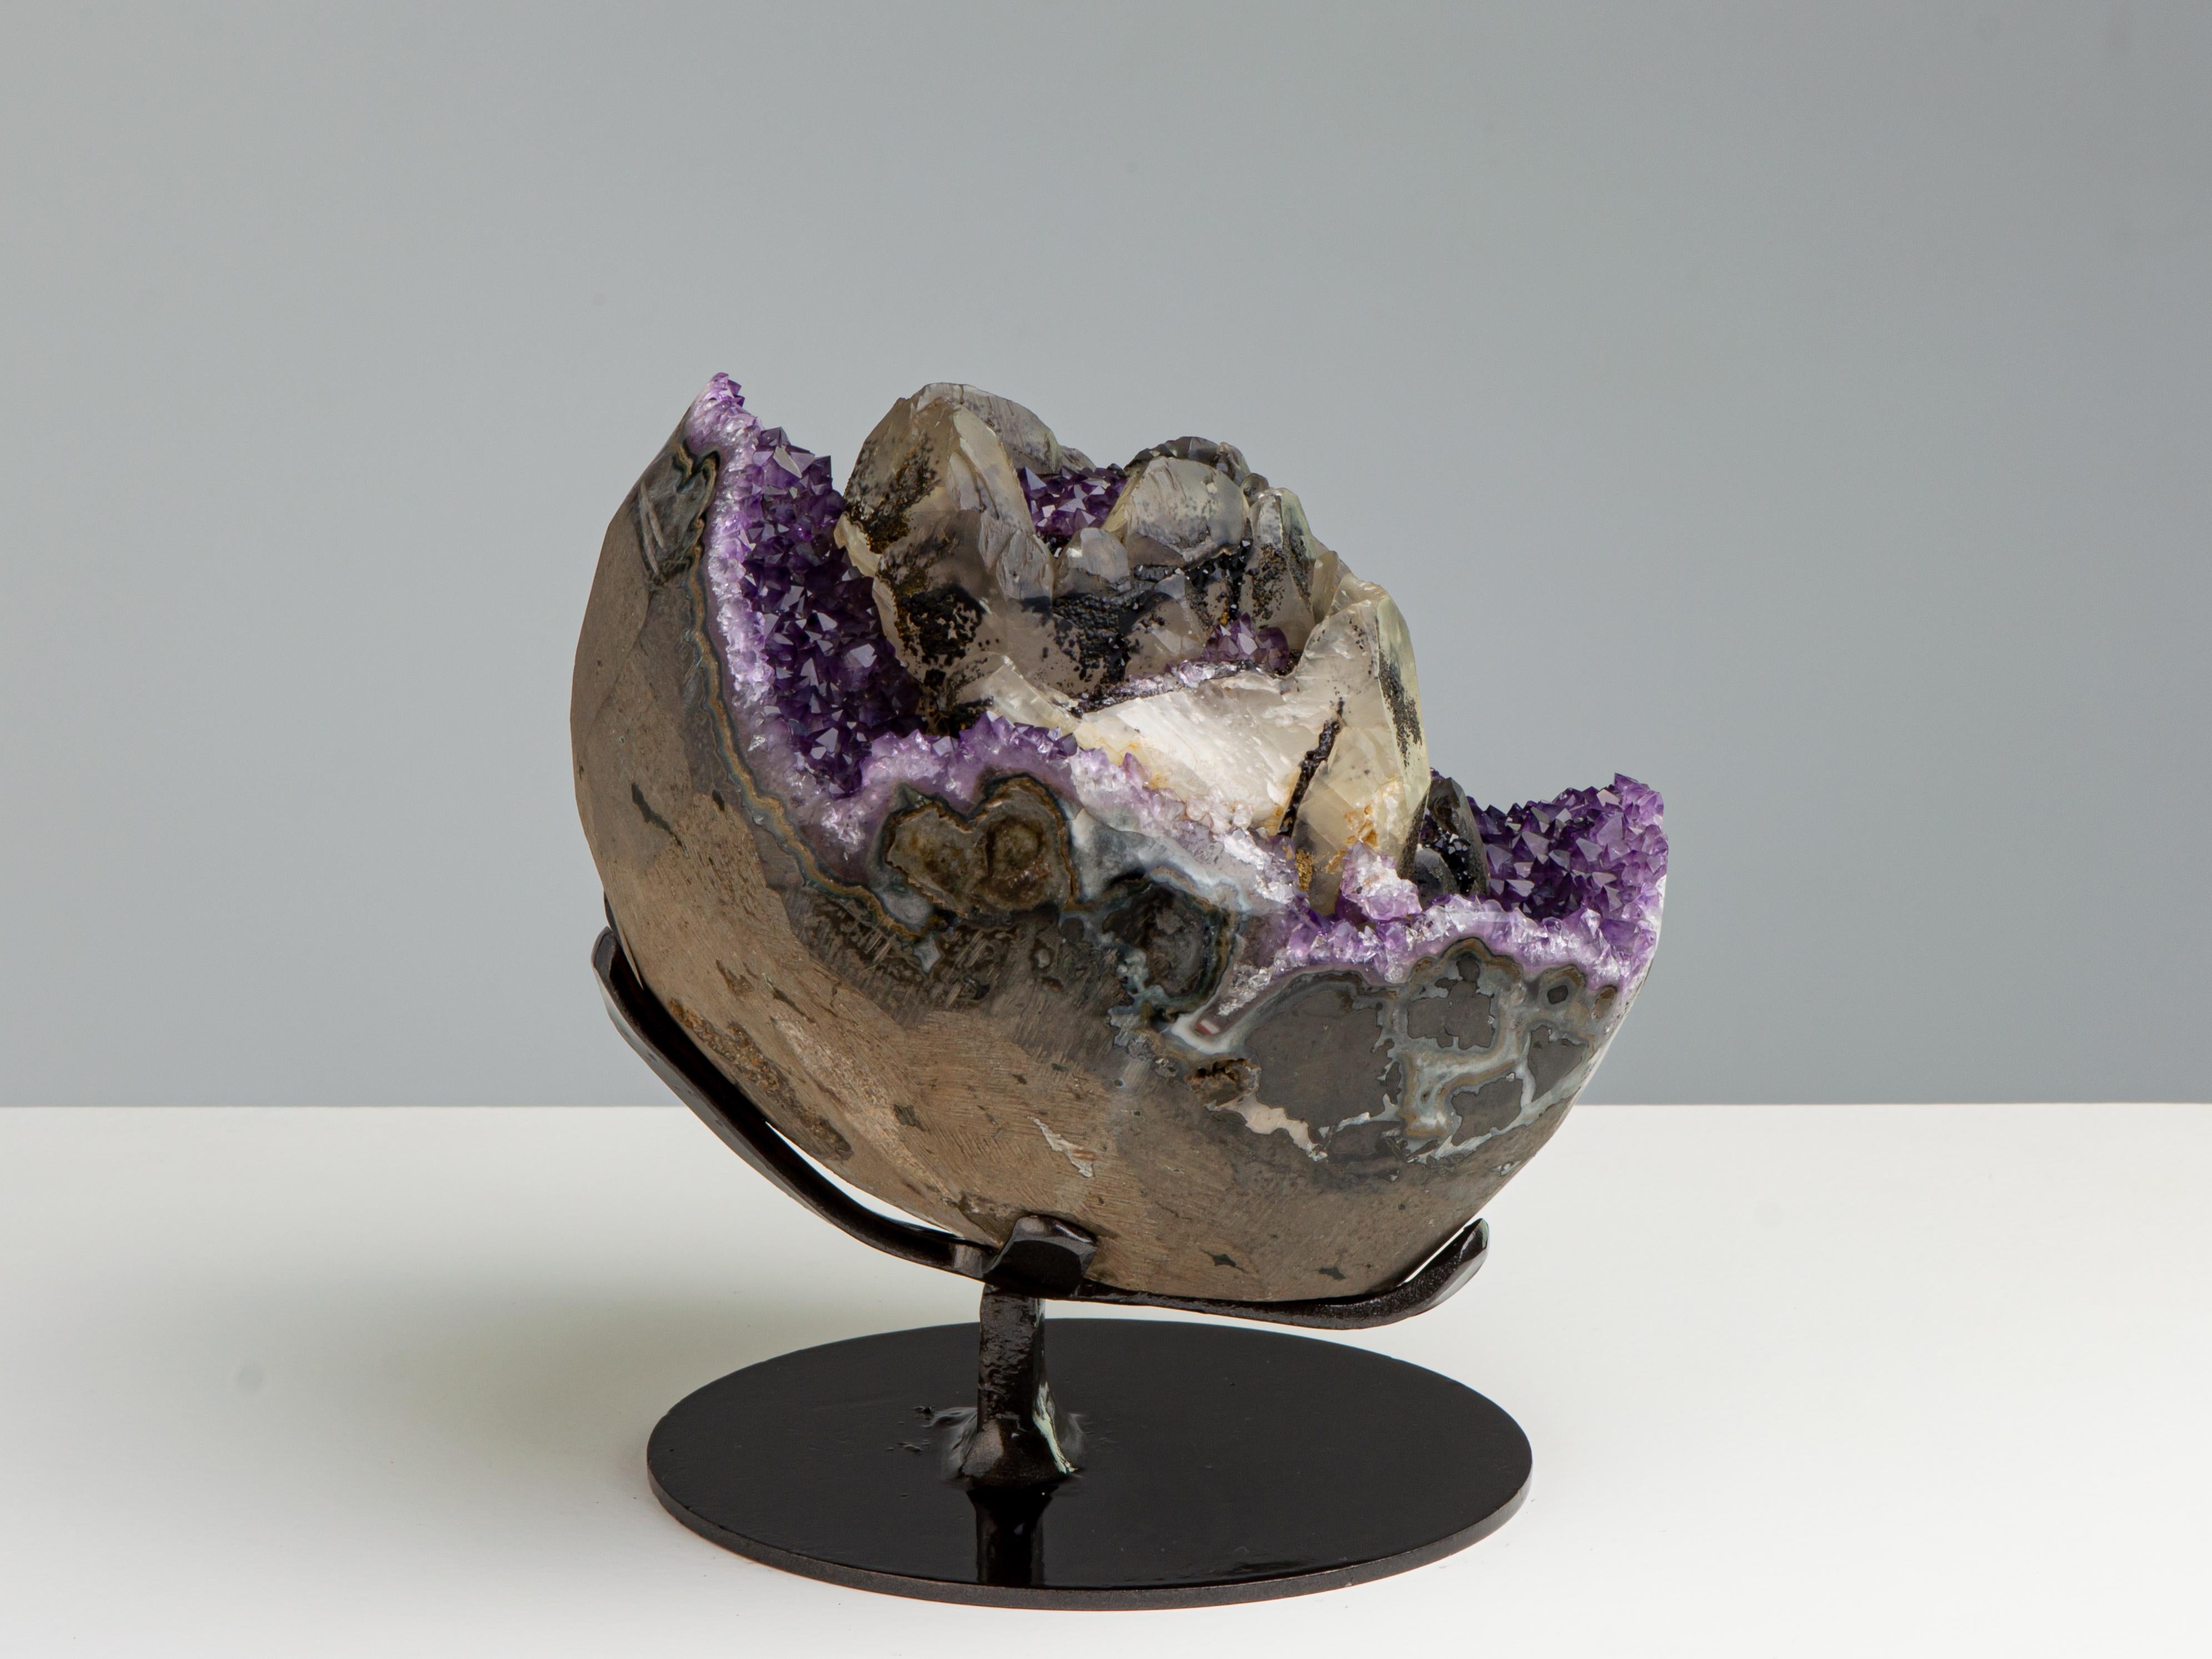 18th Century and Earlier “Cup of Flowers” Amethyst and Calcite For Sale